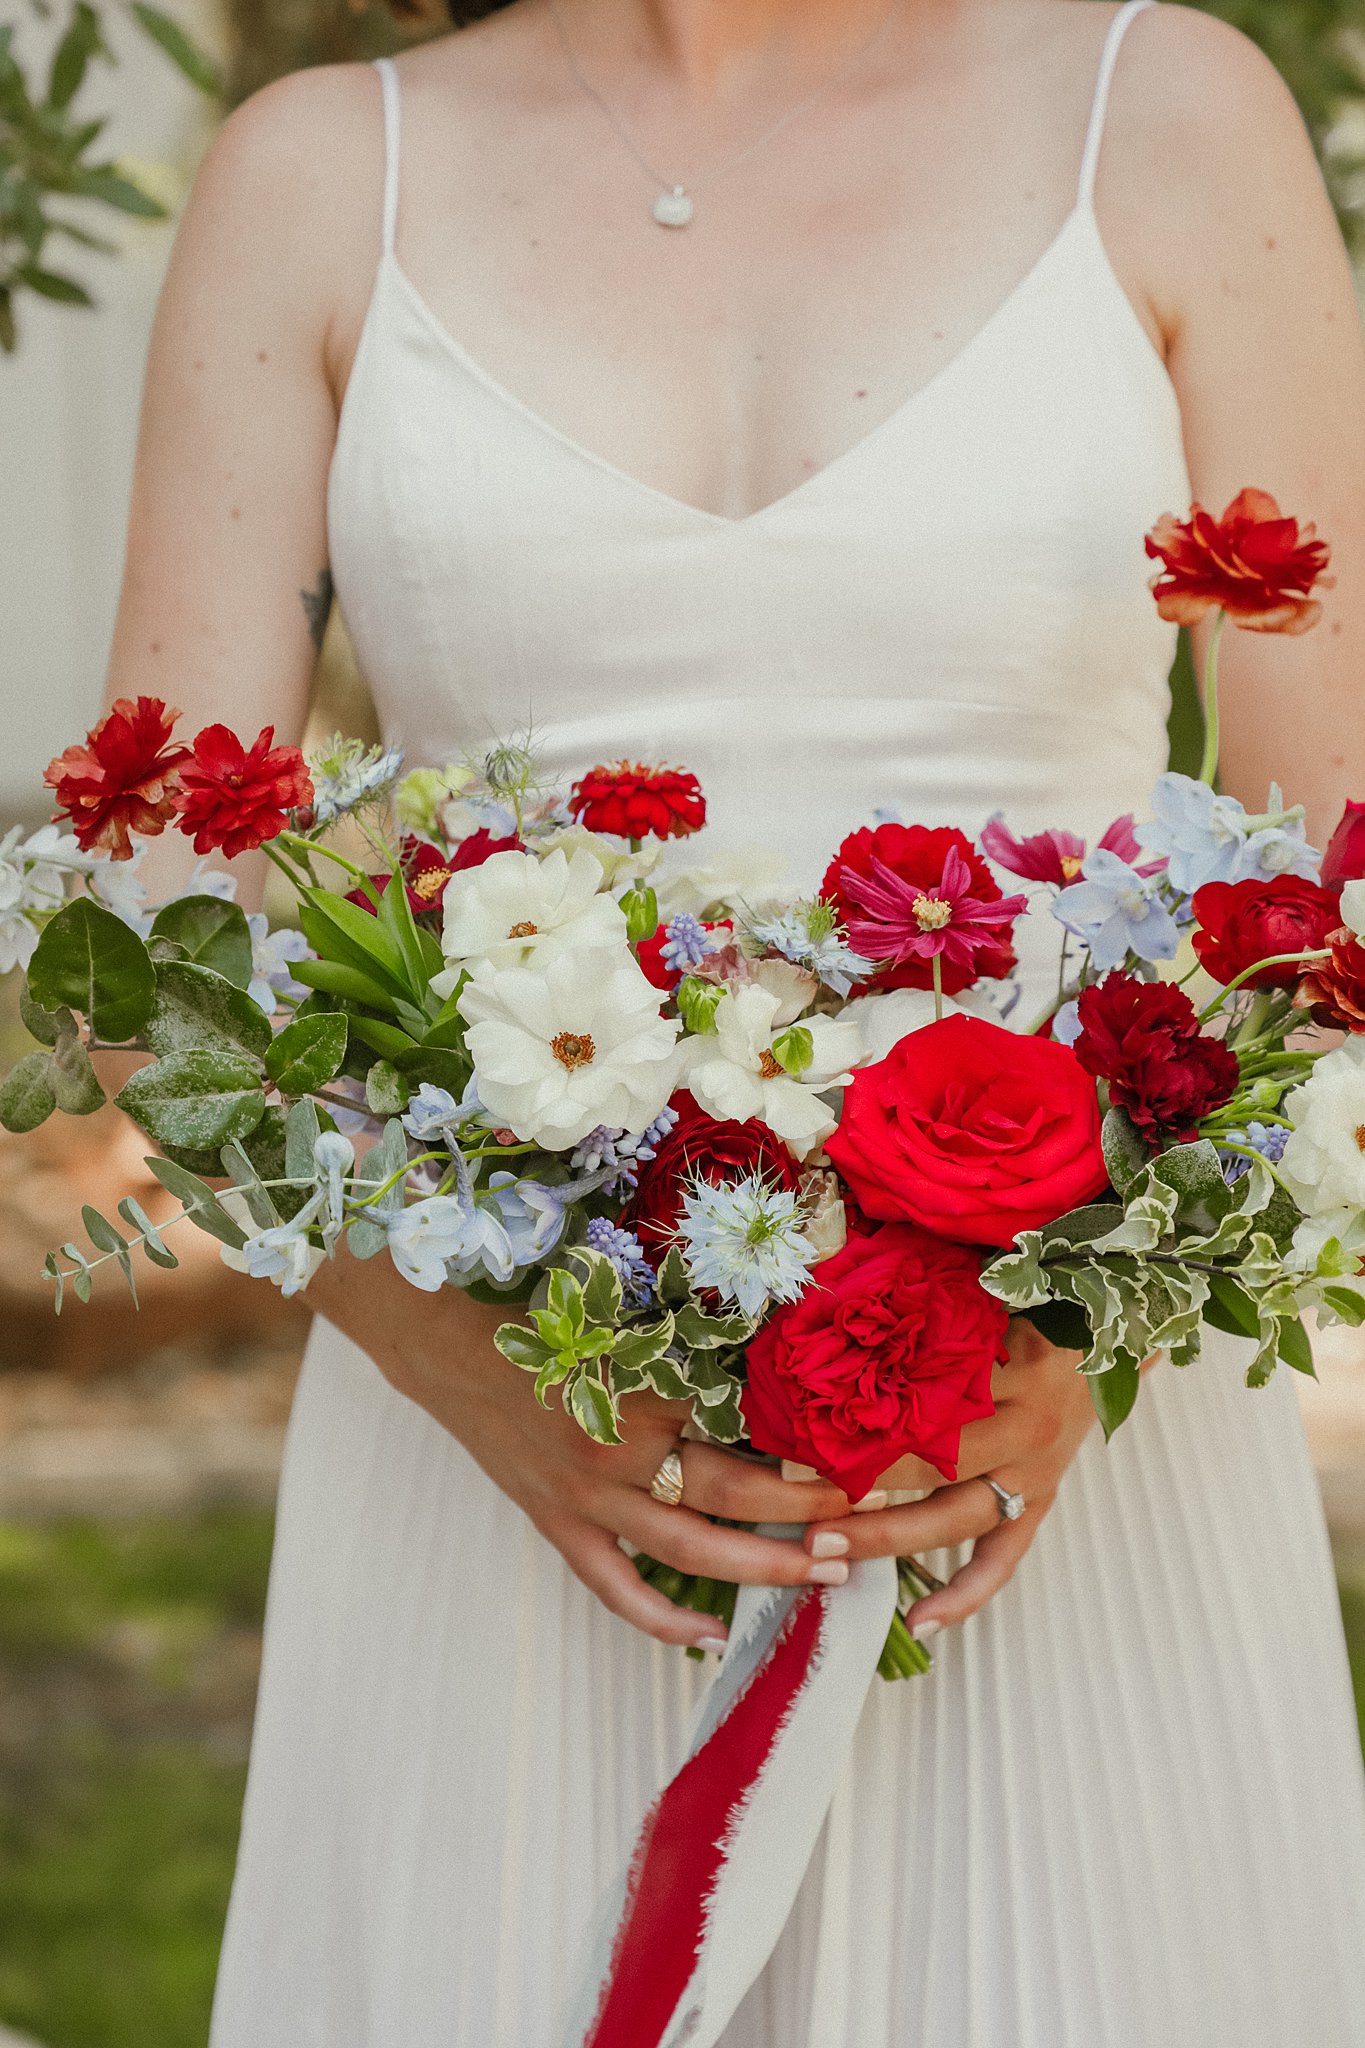 A bride with an Americana-inspired bouquet of red, white, and blue flowers.